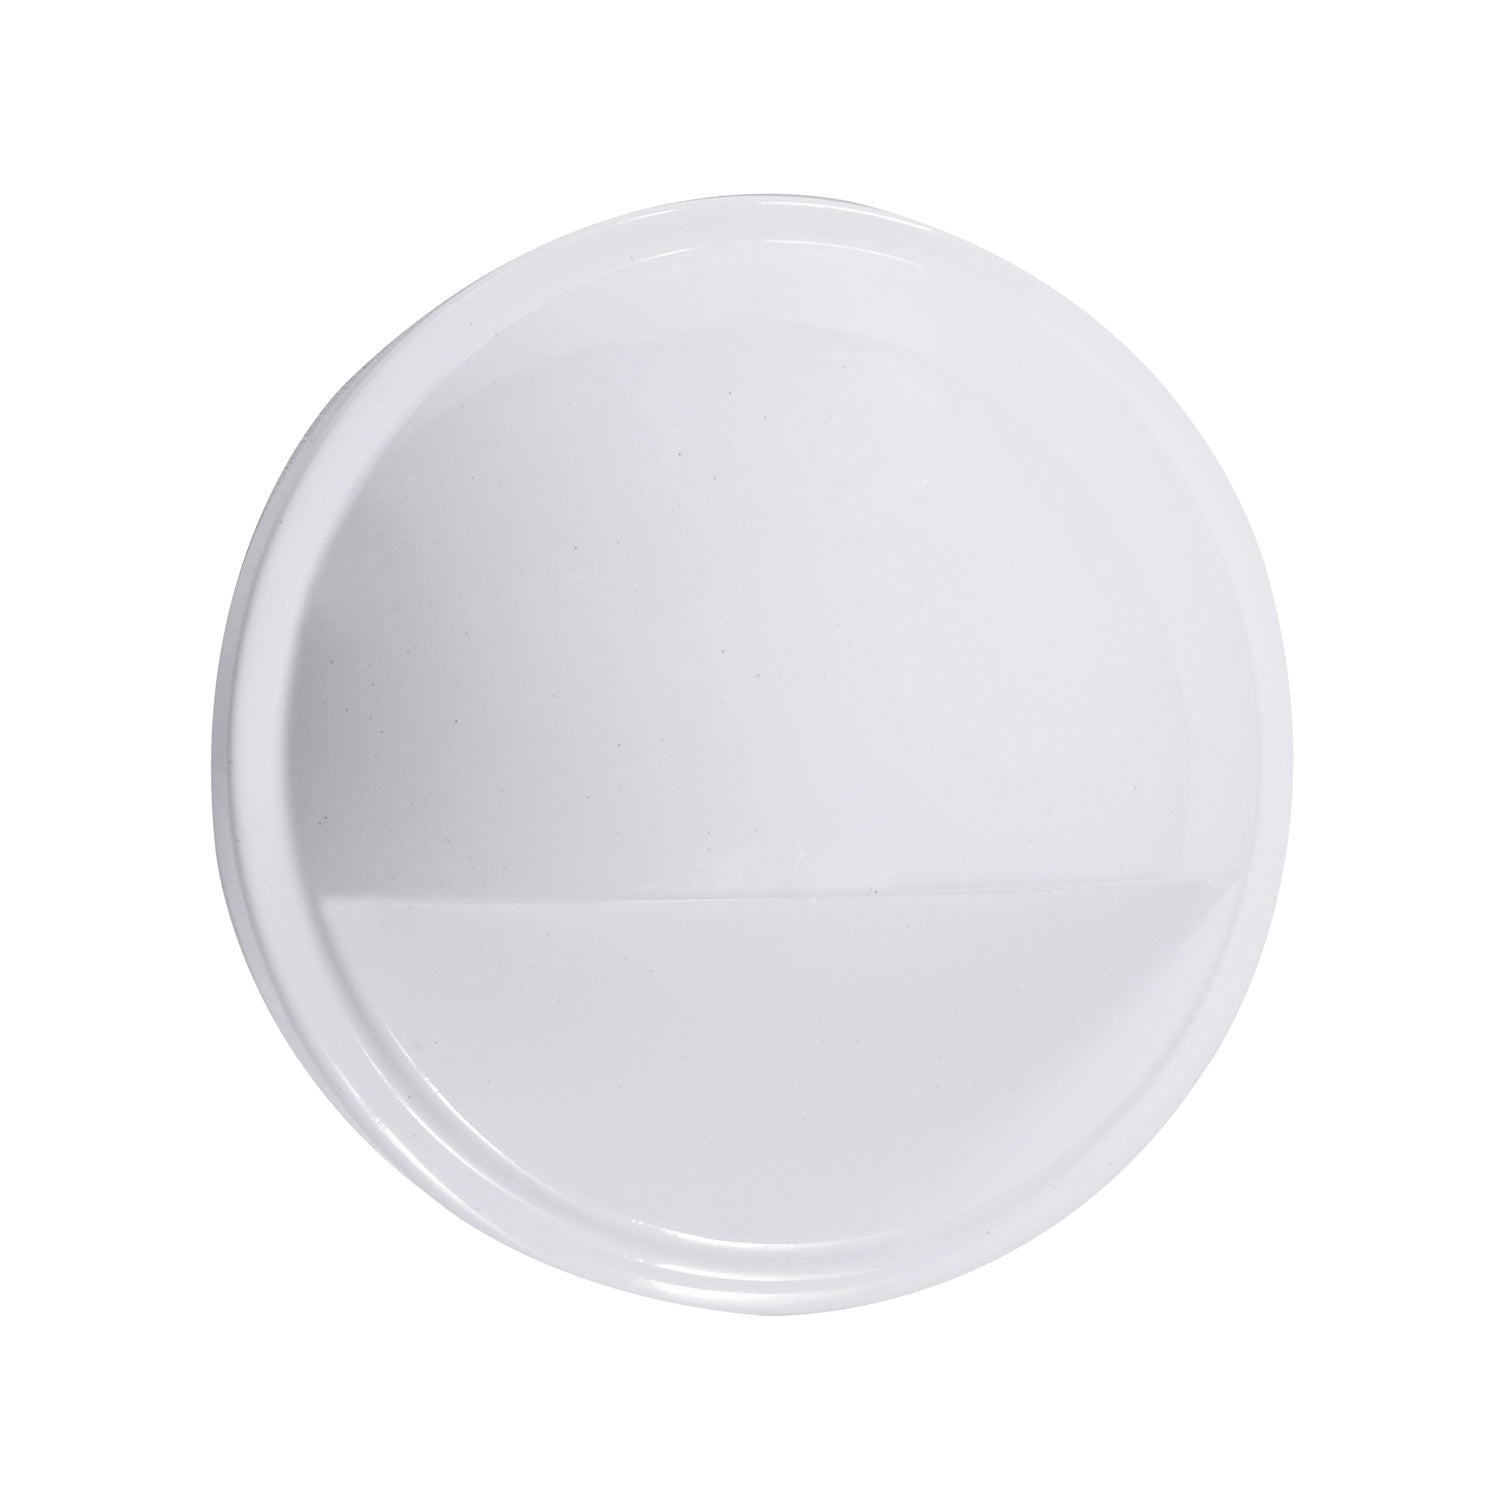 Low Voltage Eyelid Deck Light with 2W Integrated LED Chips, 12V AC/DC, White, Φ3.35" X H1.23"